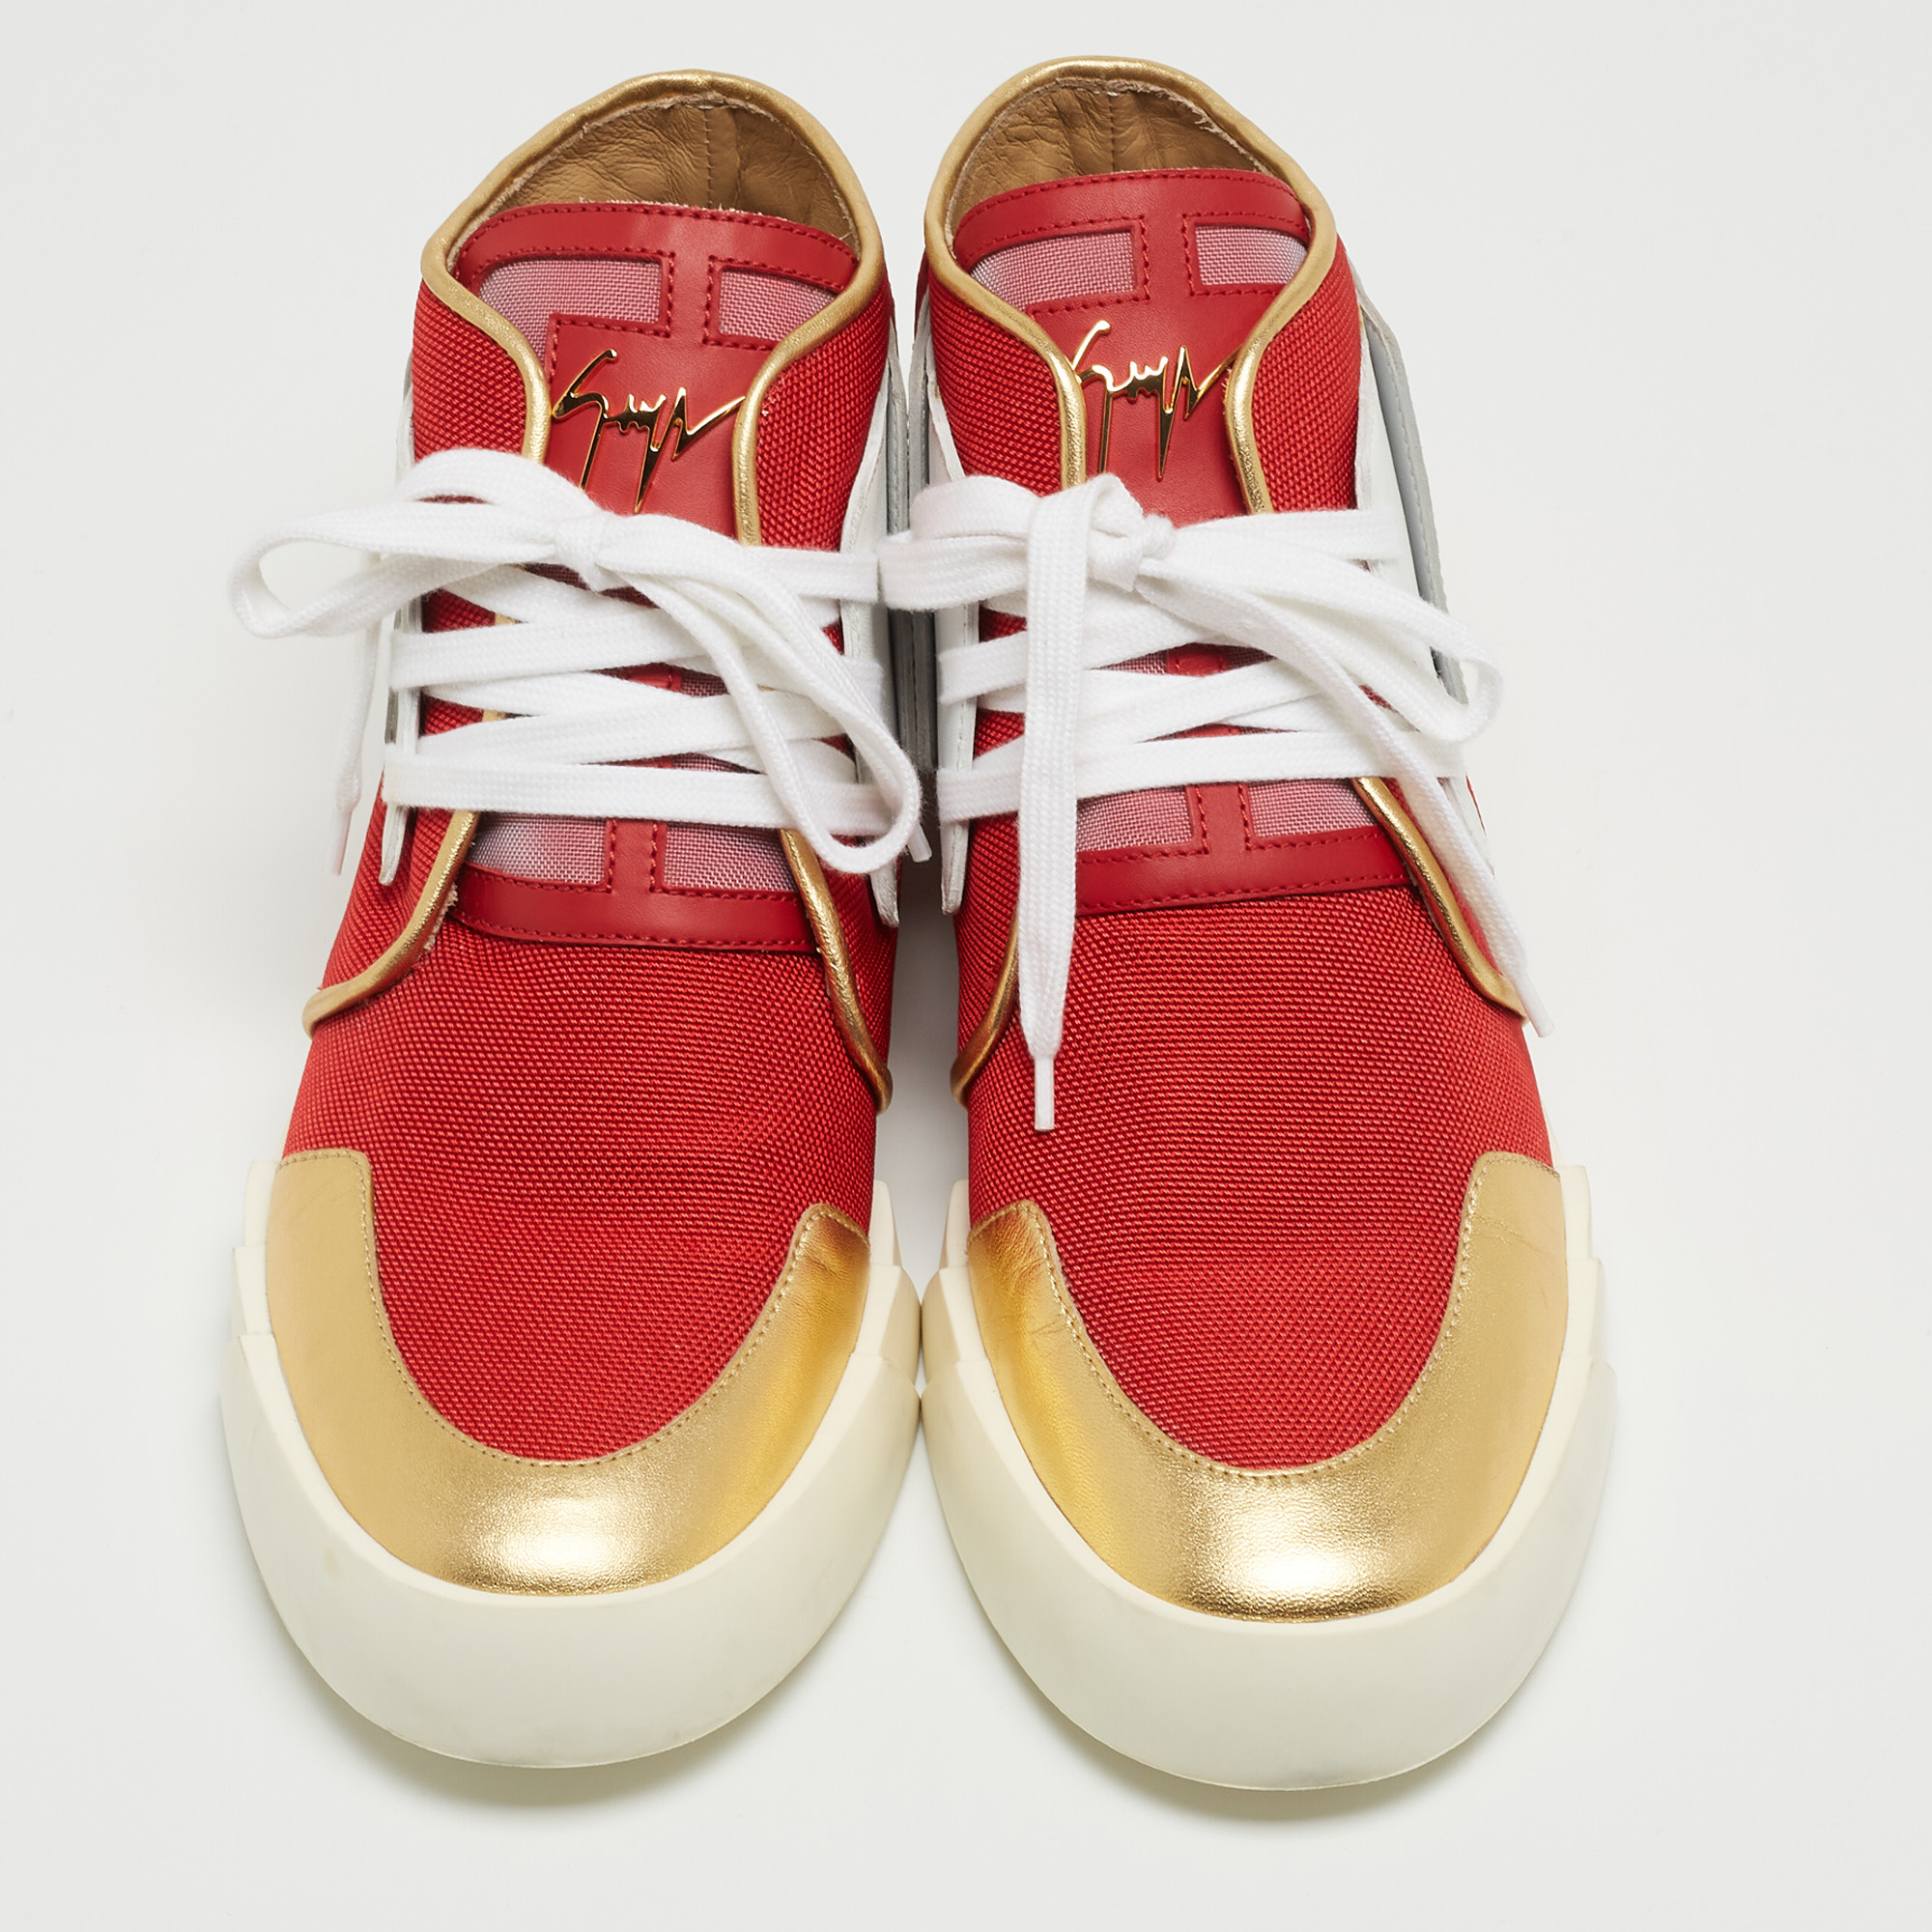 Giuseppe Zanotti Red/Gold Canvas And Leather Foxy London High Top Sneakers Size 45